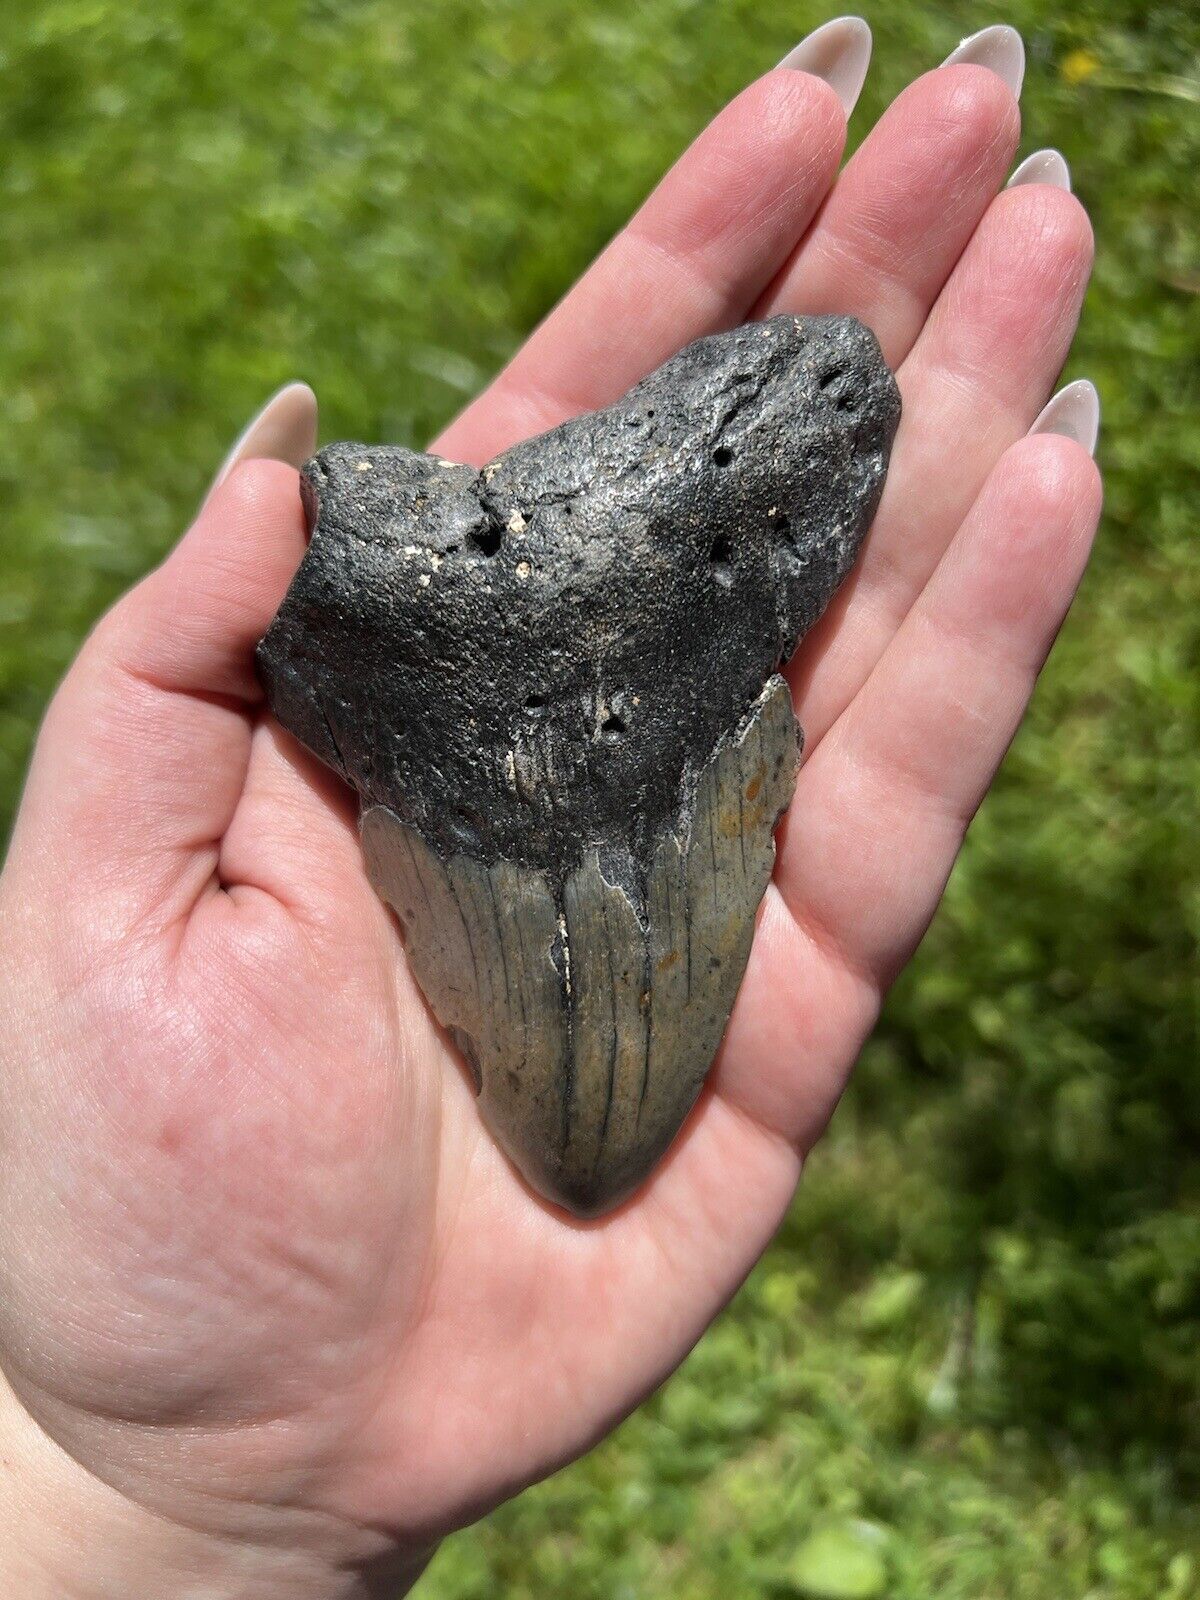 Large Megalodon Shark Tooth- Natural 3.3” Miocene Age Fossilized Shark Tooth